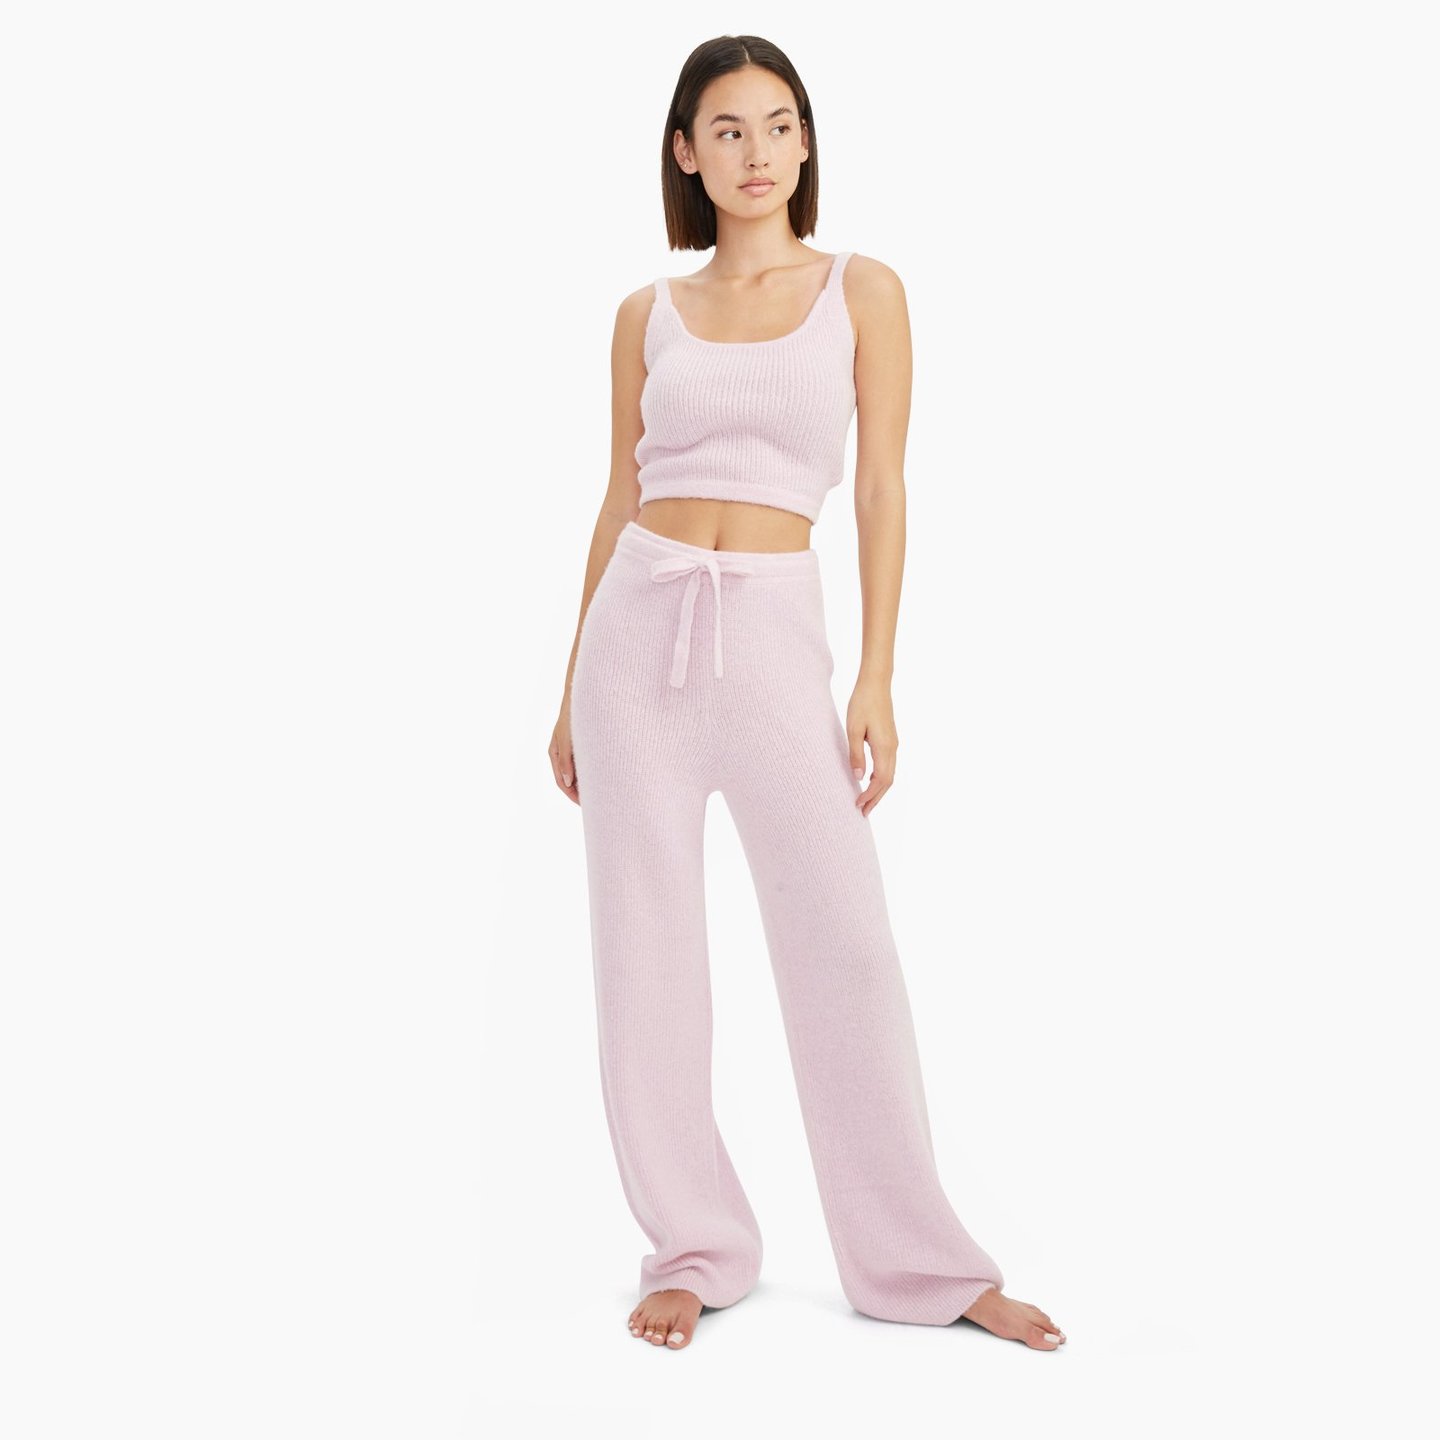 NWEP001444_Luxe_Merino_Cashmere_Wide_Leg_Pant_Dusty_Pink_005_1440x.jpg